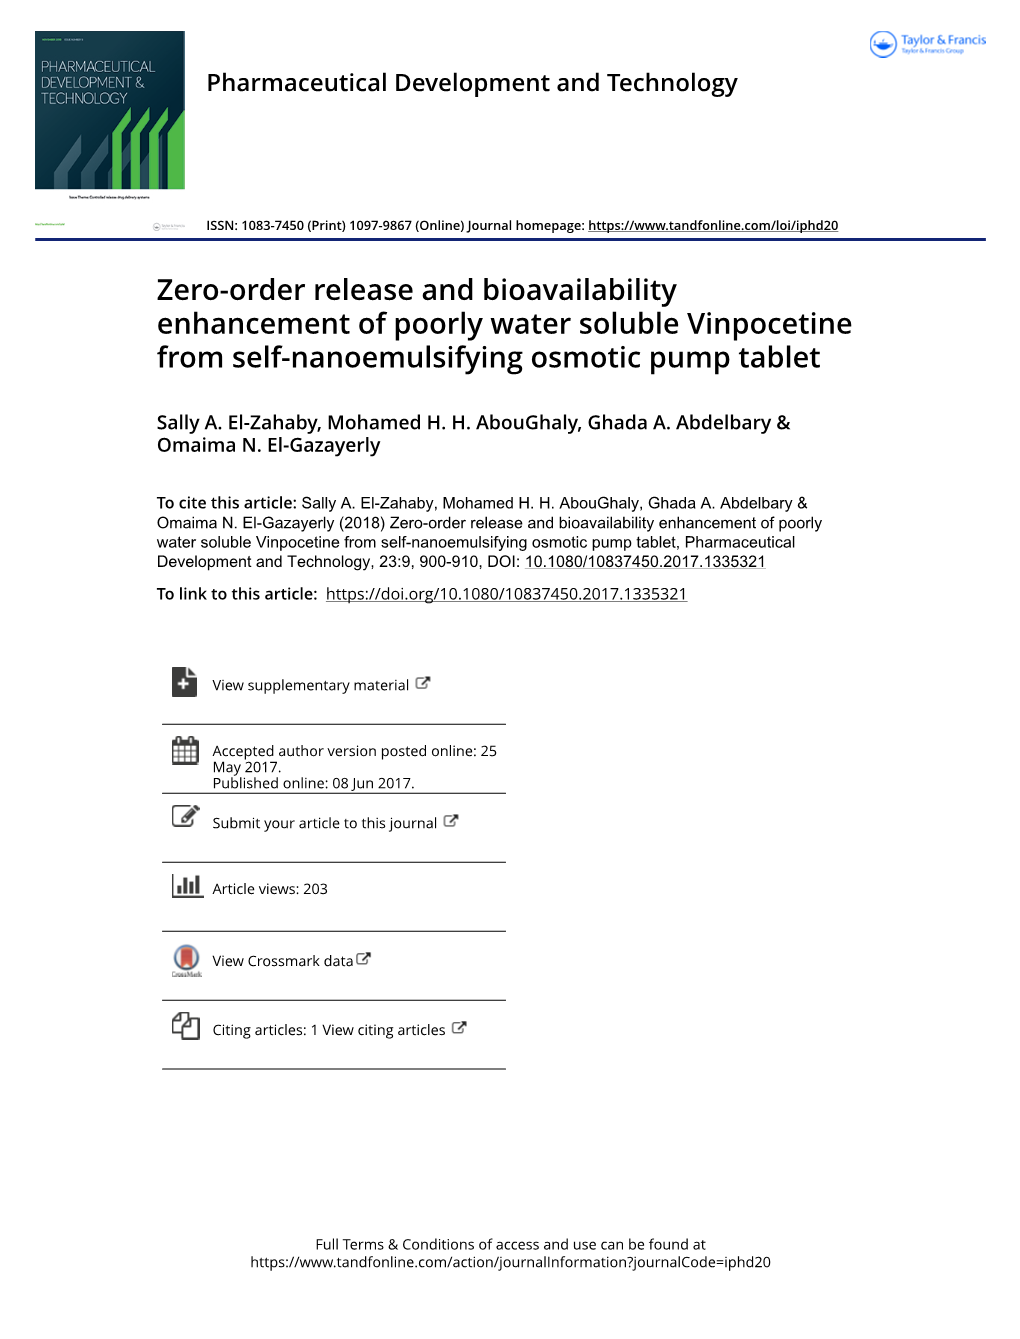 Zero-Order Release and Bioavailability Enhancement of Poorly Water Soluble Vinpocetine from Self-Nanoemulsifying Osmotic Pump Tablet